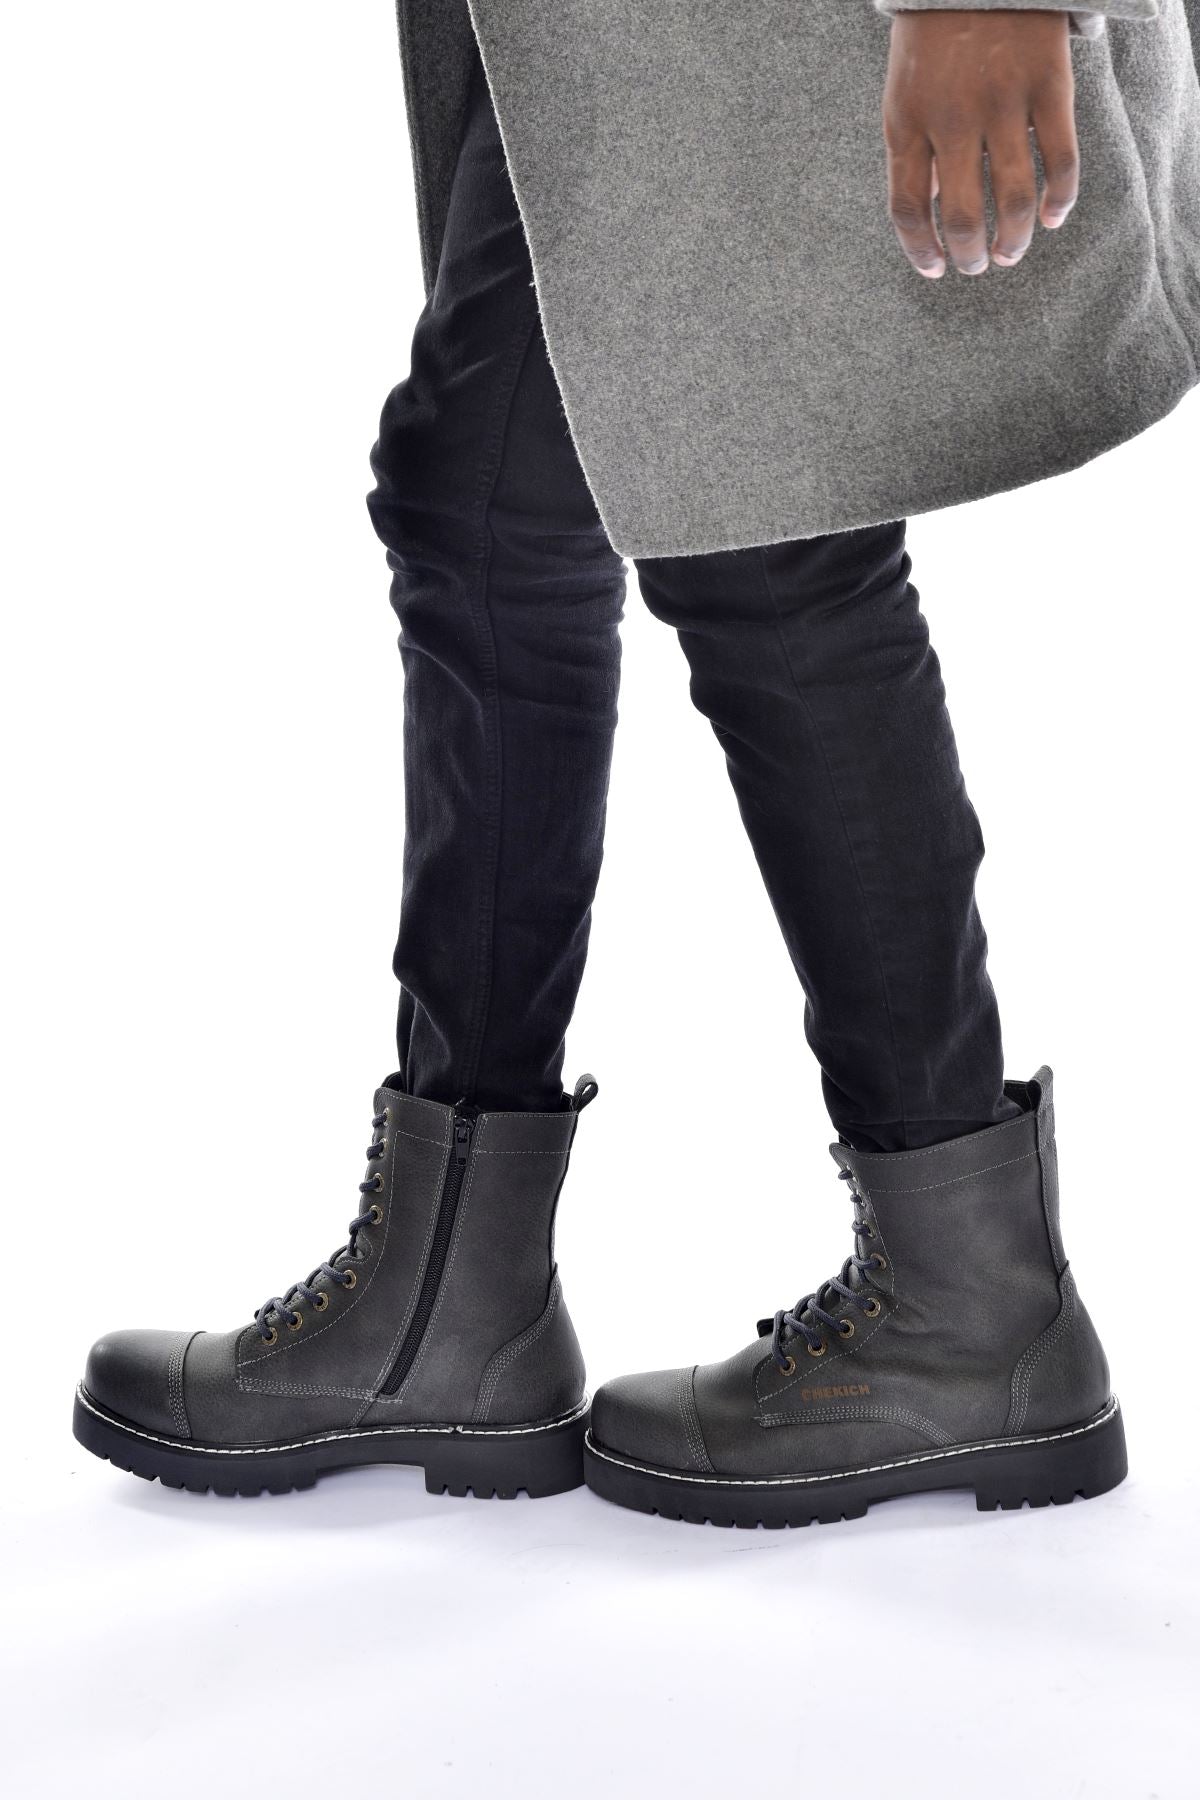 CH009 Men's Leather Navy Blue-Black Sole Casual Winter Boots - STREETMODE ™